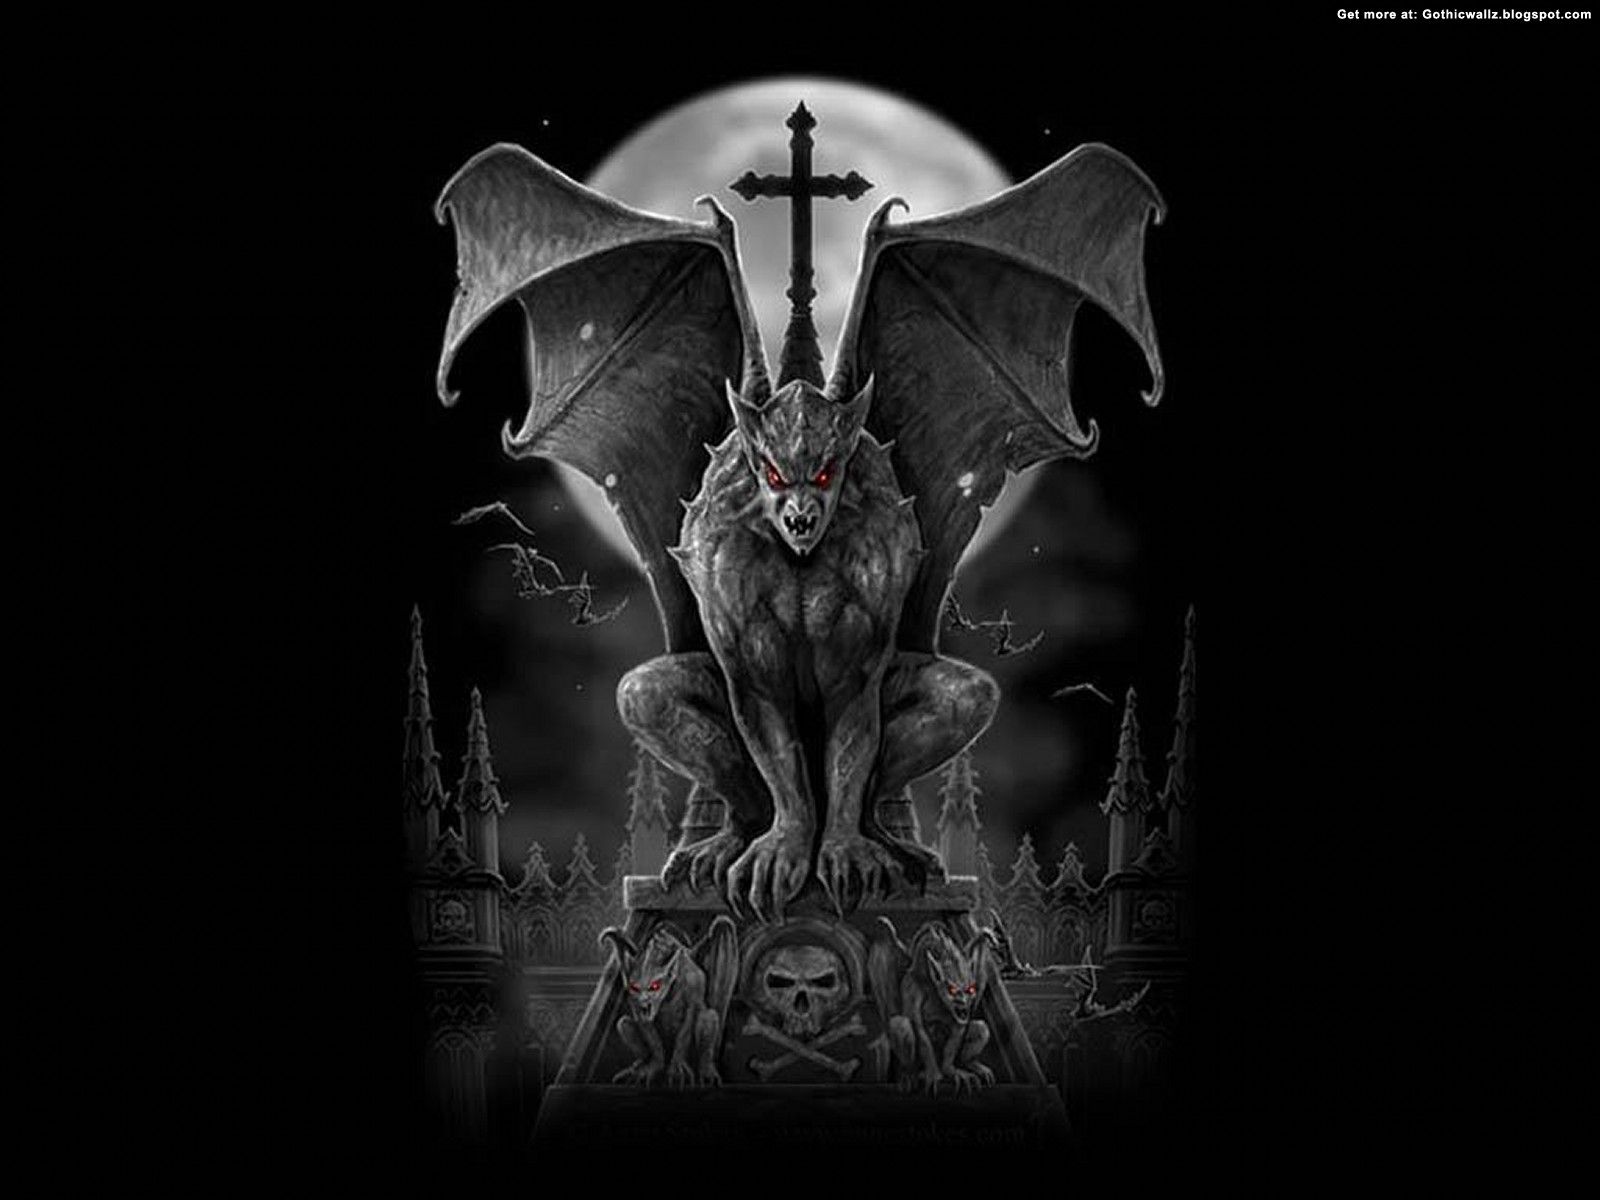 Classic Gothic - Dark Gothic Wallpapers - FREE Gothic Wallpaper ...